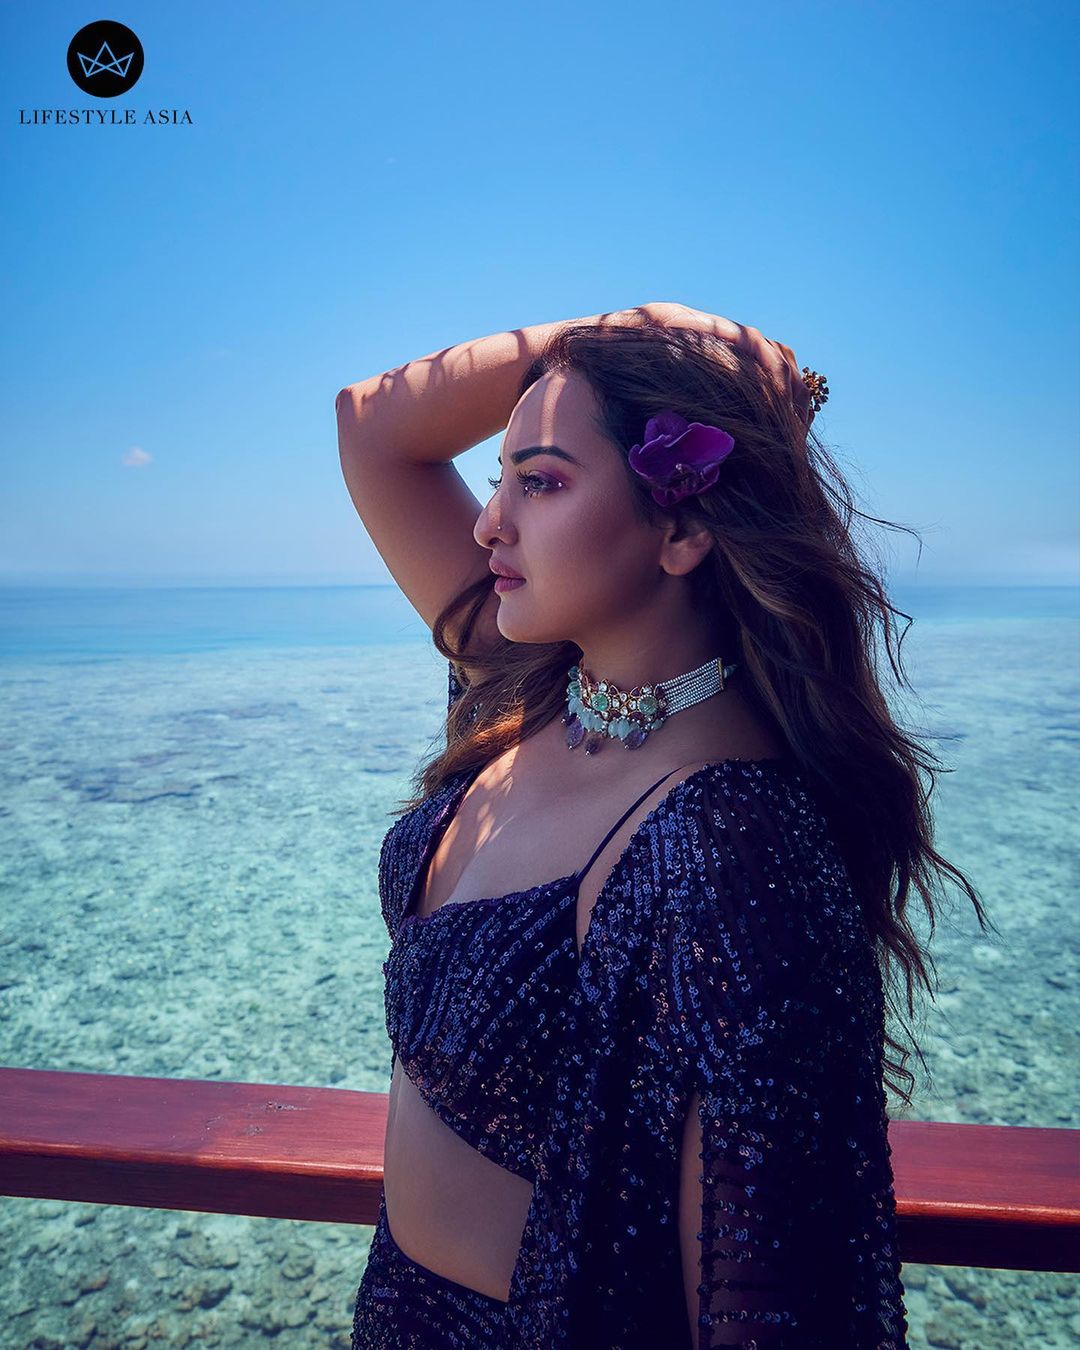 Sonakshi Sinha Blue Film Sex Videos - Sonakshi Sinha Goes Glam In Sequinned Outfits During Her Photoshoot In  Maldives, Here's A Glimpse Of Her Sexy Pics - News18